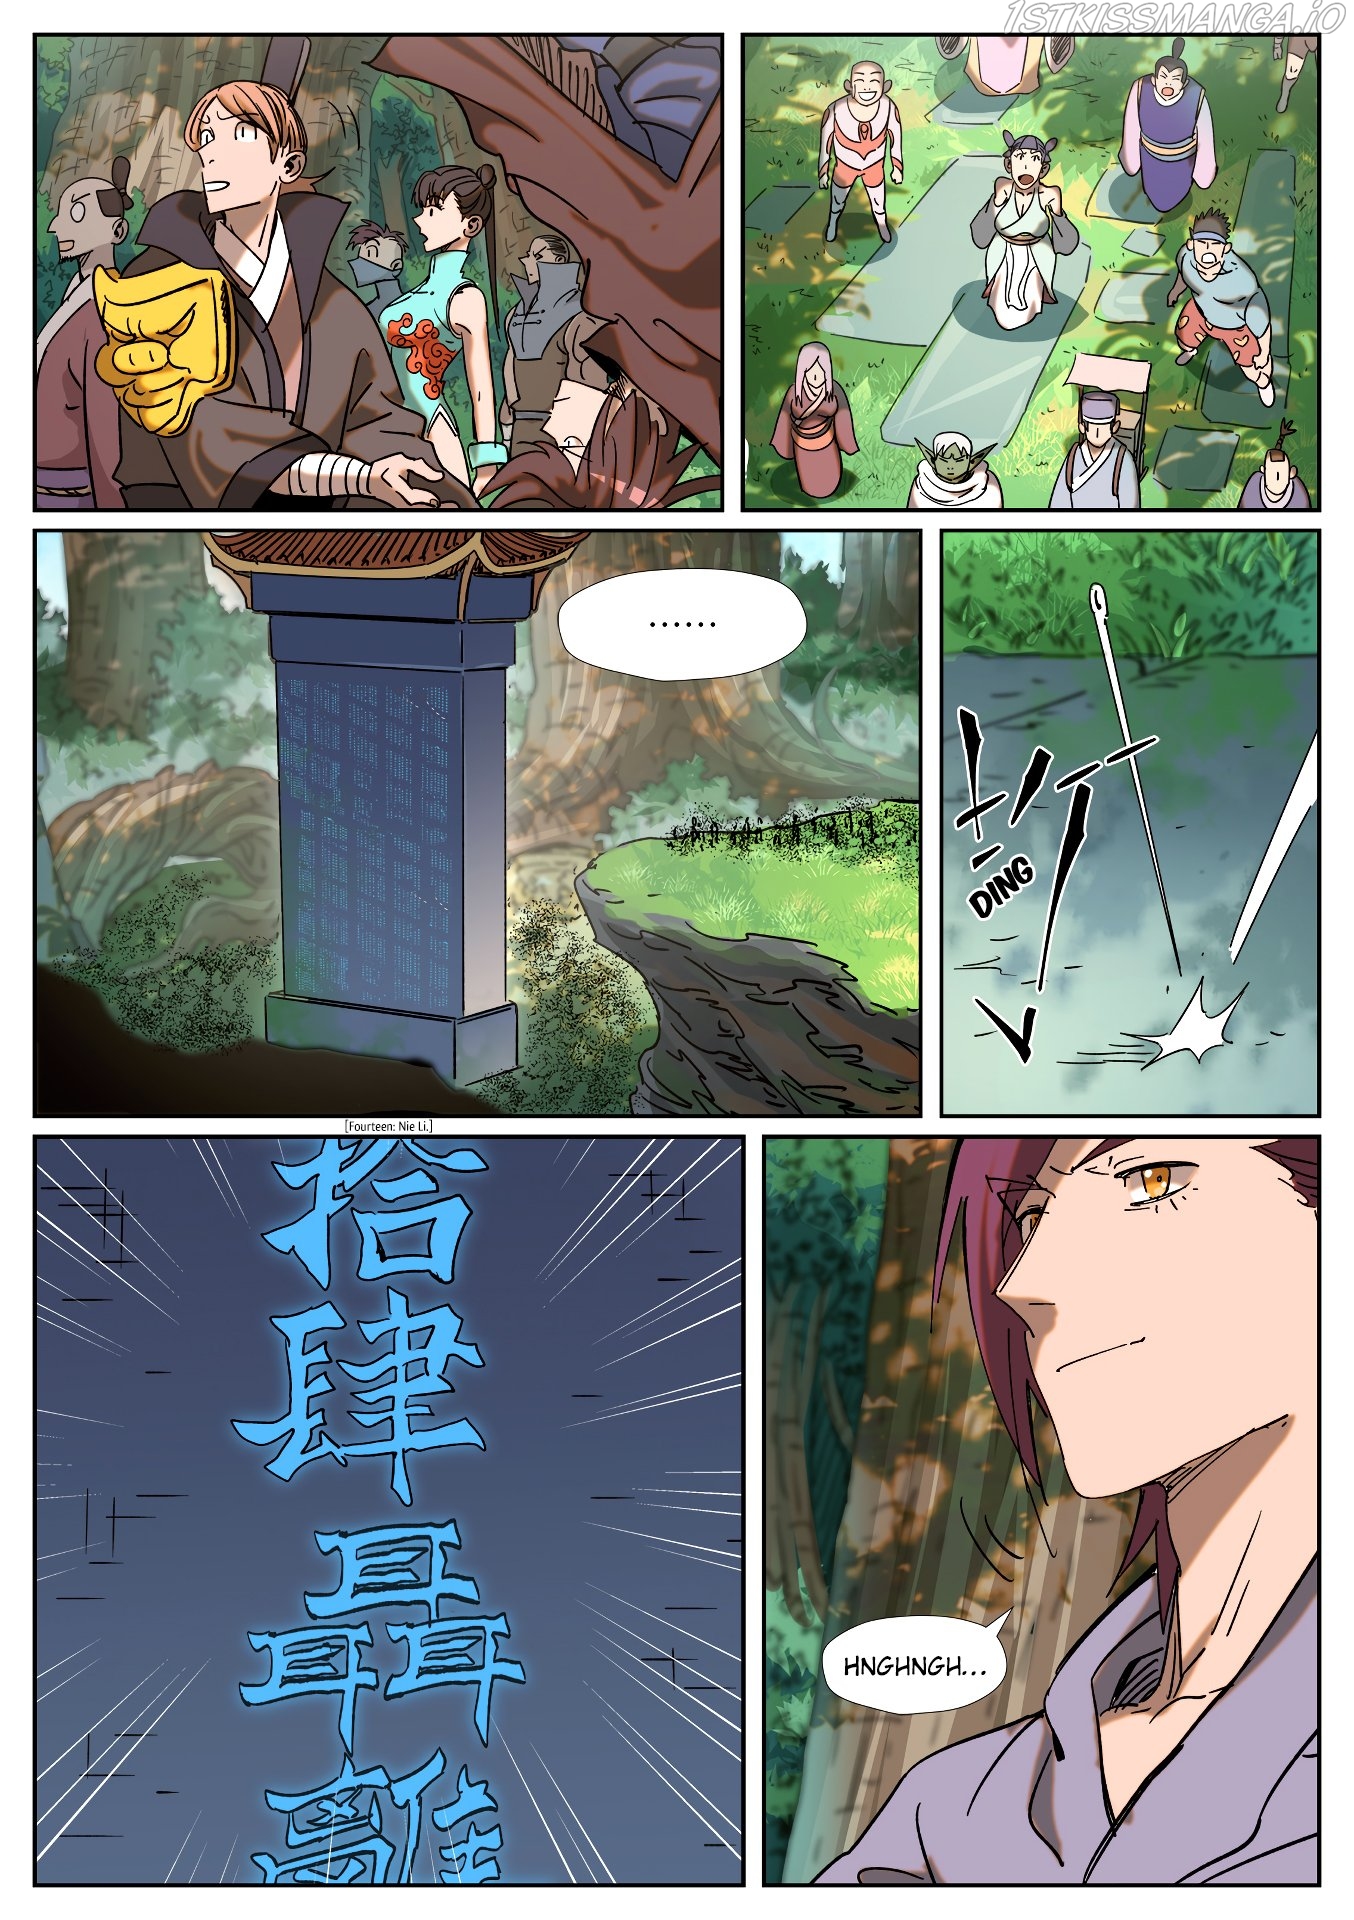 Tales of Demons and Gods Manhua Chapter 314.5 - Page 6